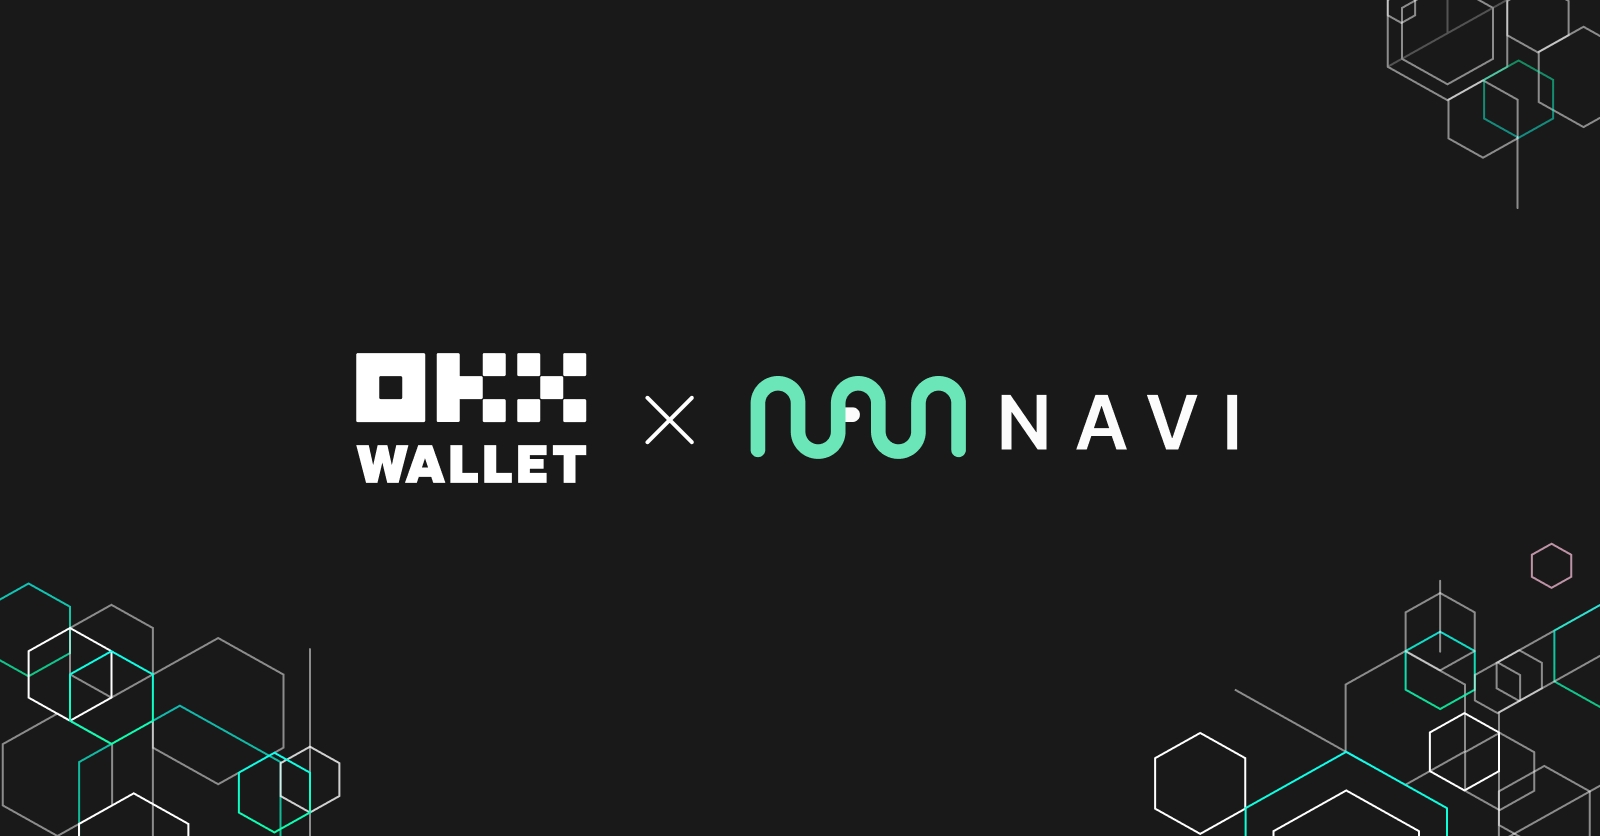 Flash News: OKX Wallet Now Integrated with NAVI and Offers Extra Yield For a Limited Time